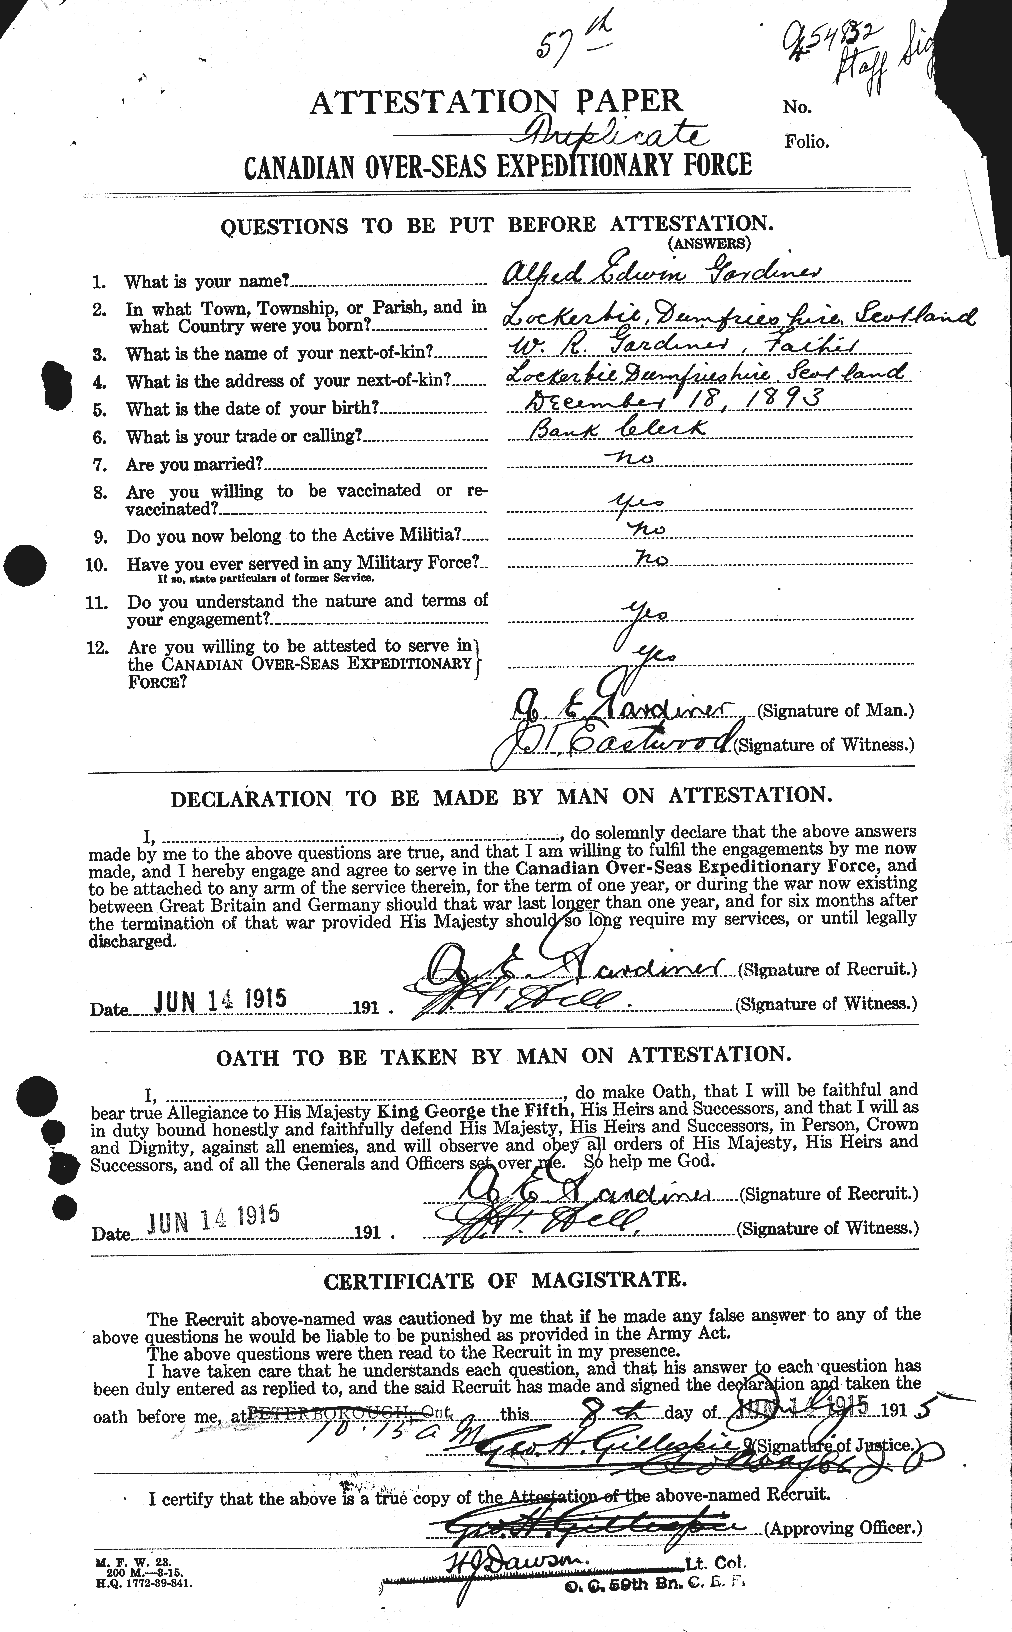 Personnel Records of the First World War - CEF 338500a